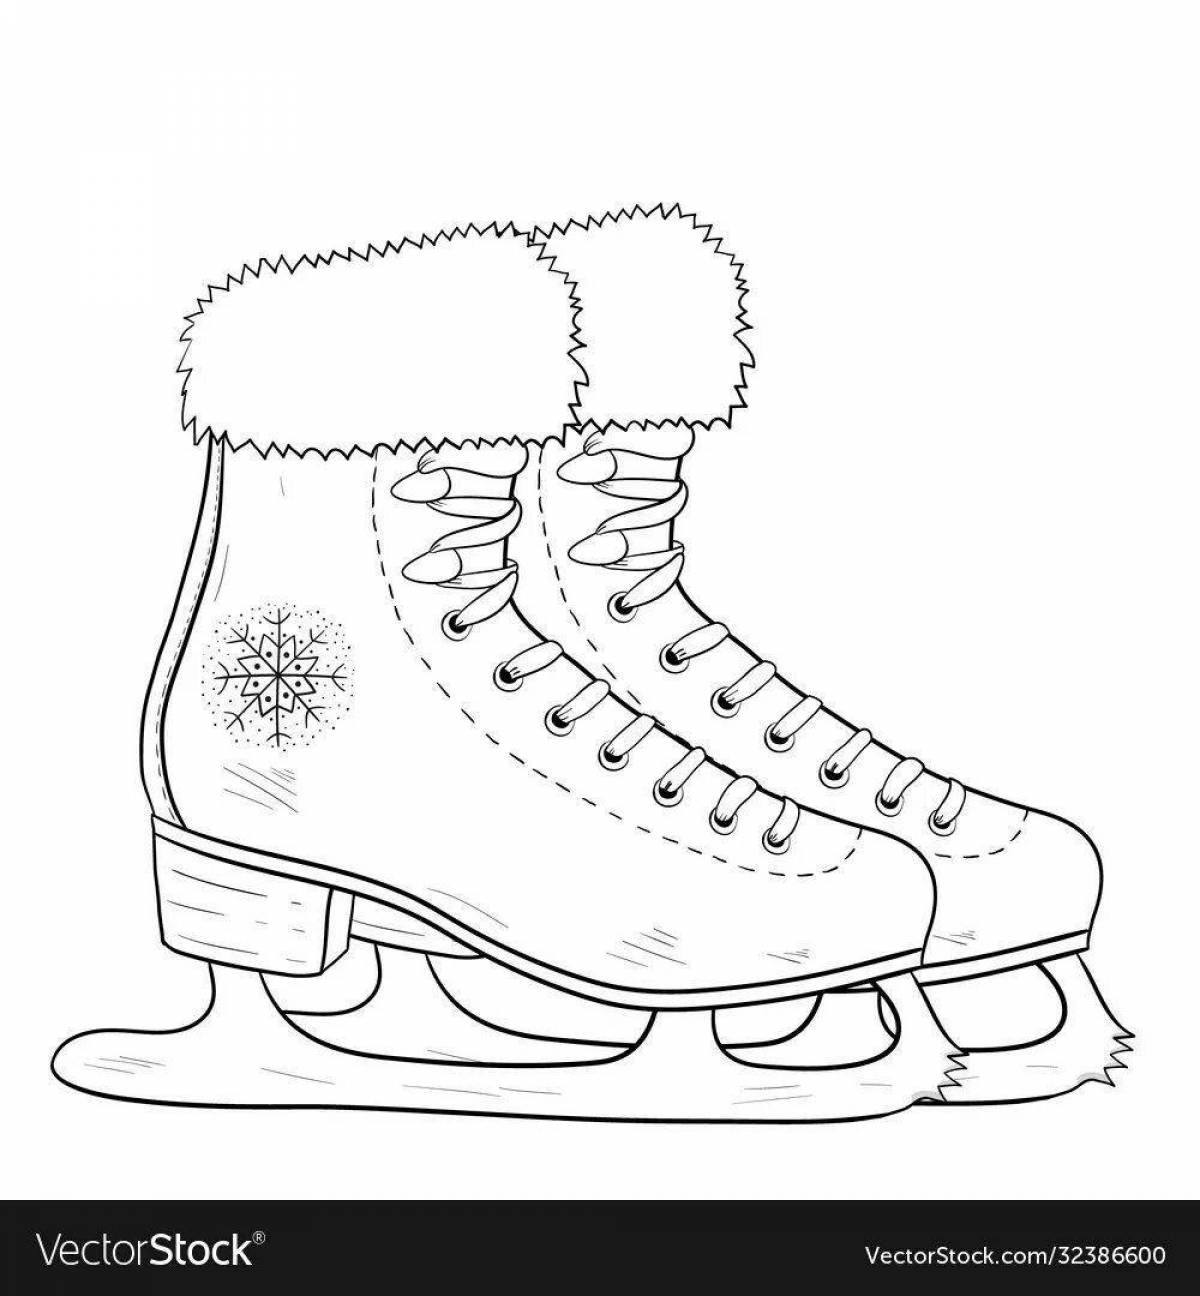 Luminous skates coloring book for children 5-6 years old